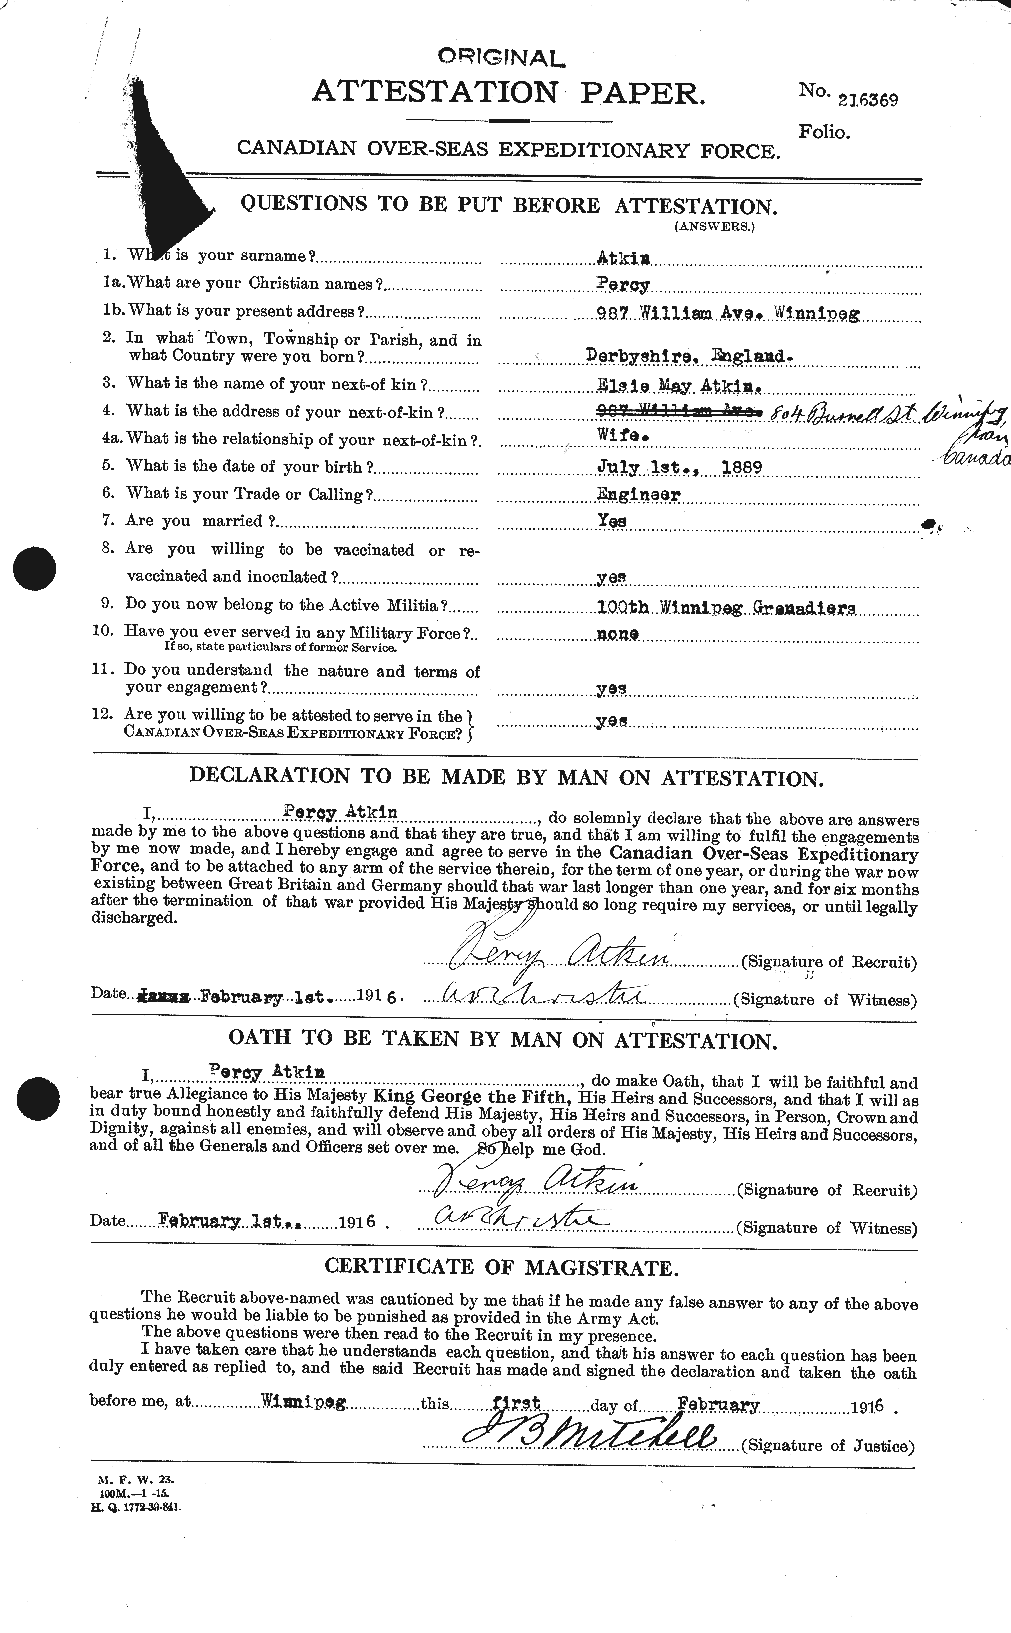 Personnel Records of the First World War - CEF 216914a